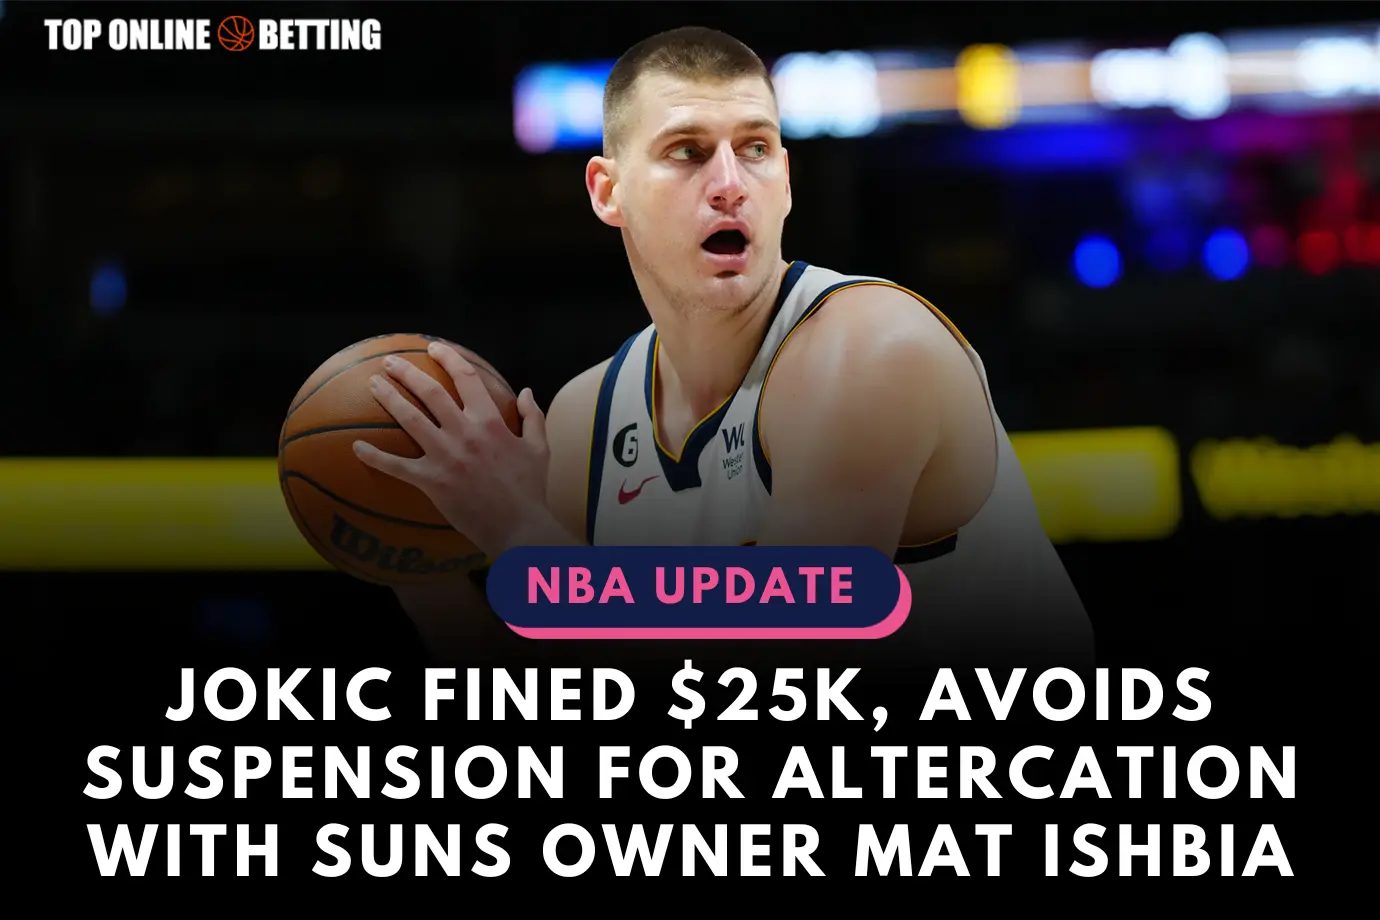 Jokic Fined $25K, Avoids Suspension for Altercation with Suns Owner Mat Ishbia